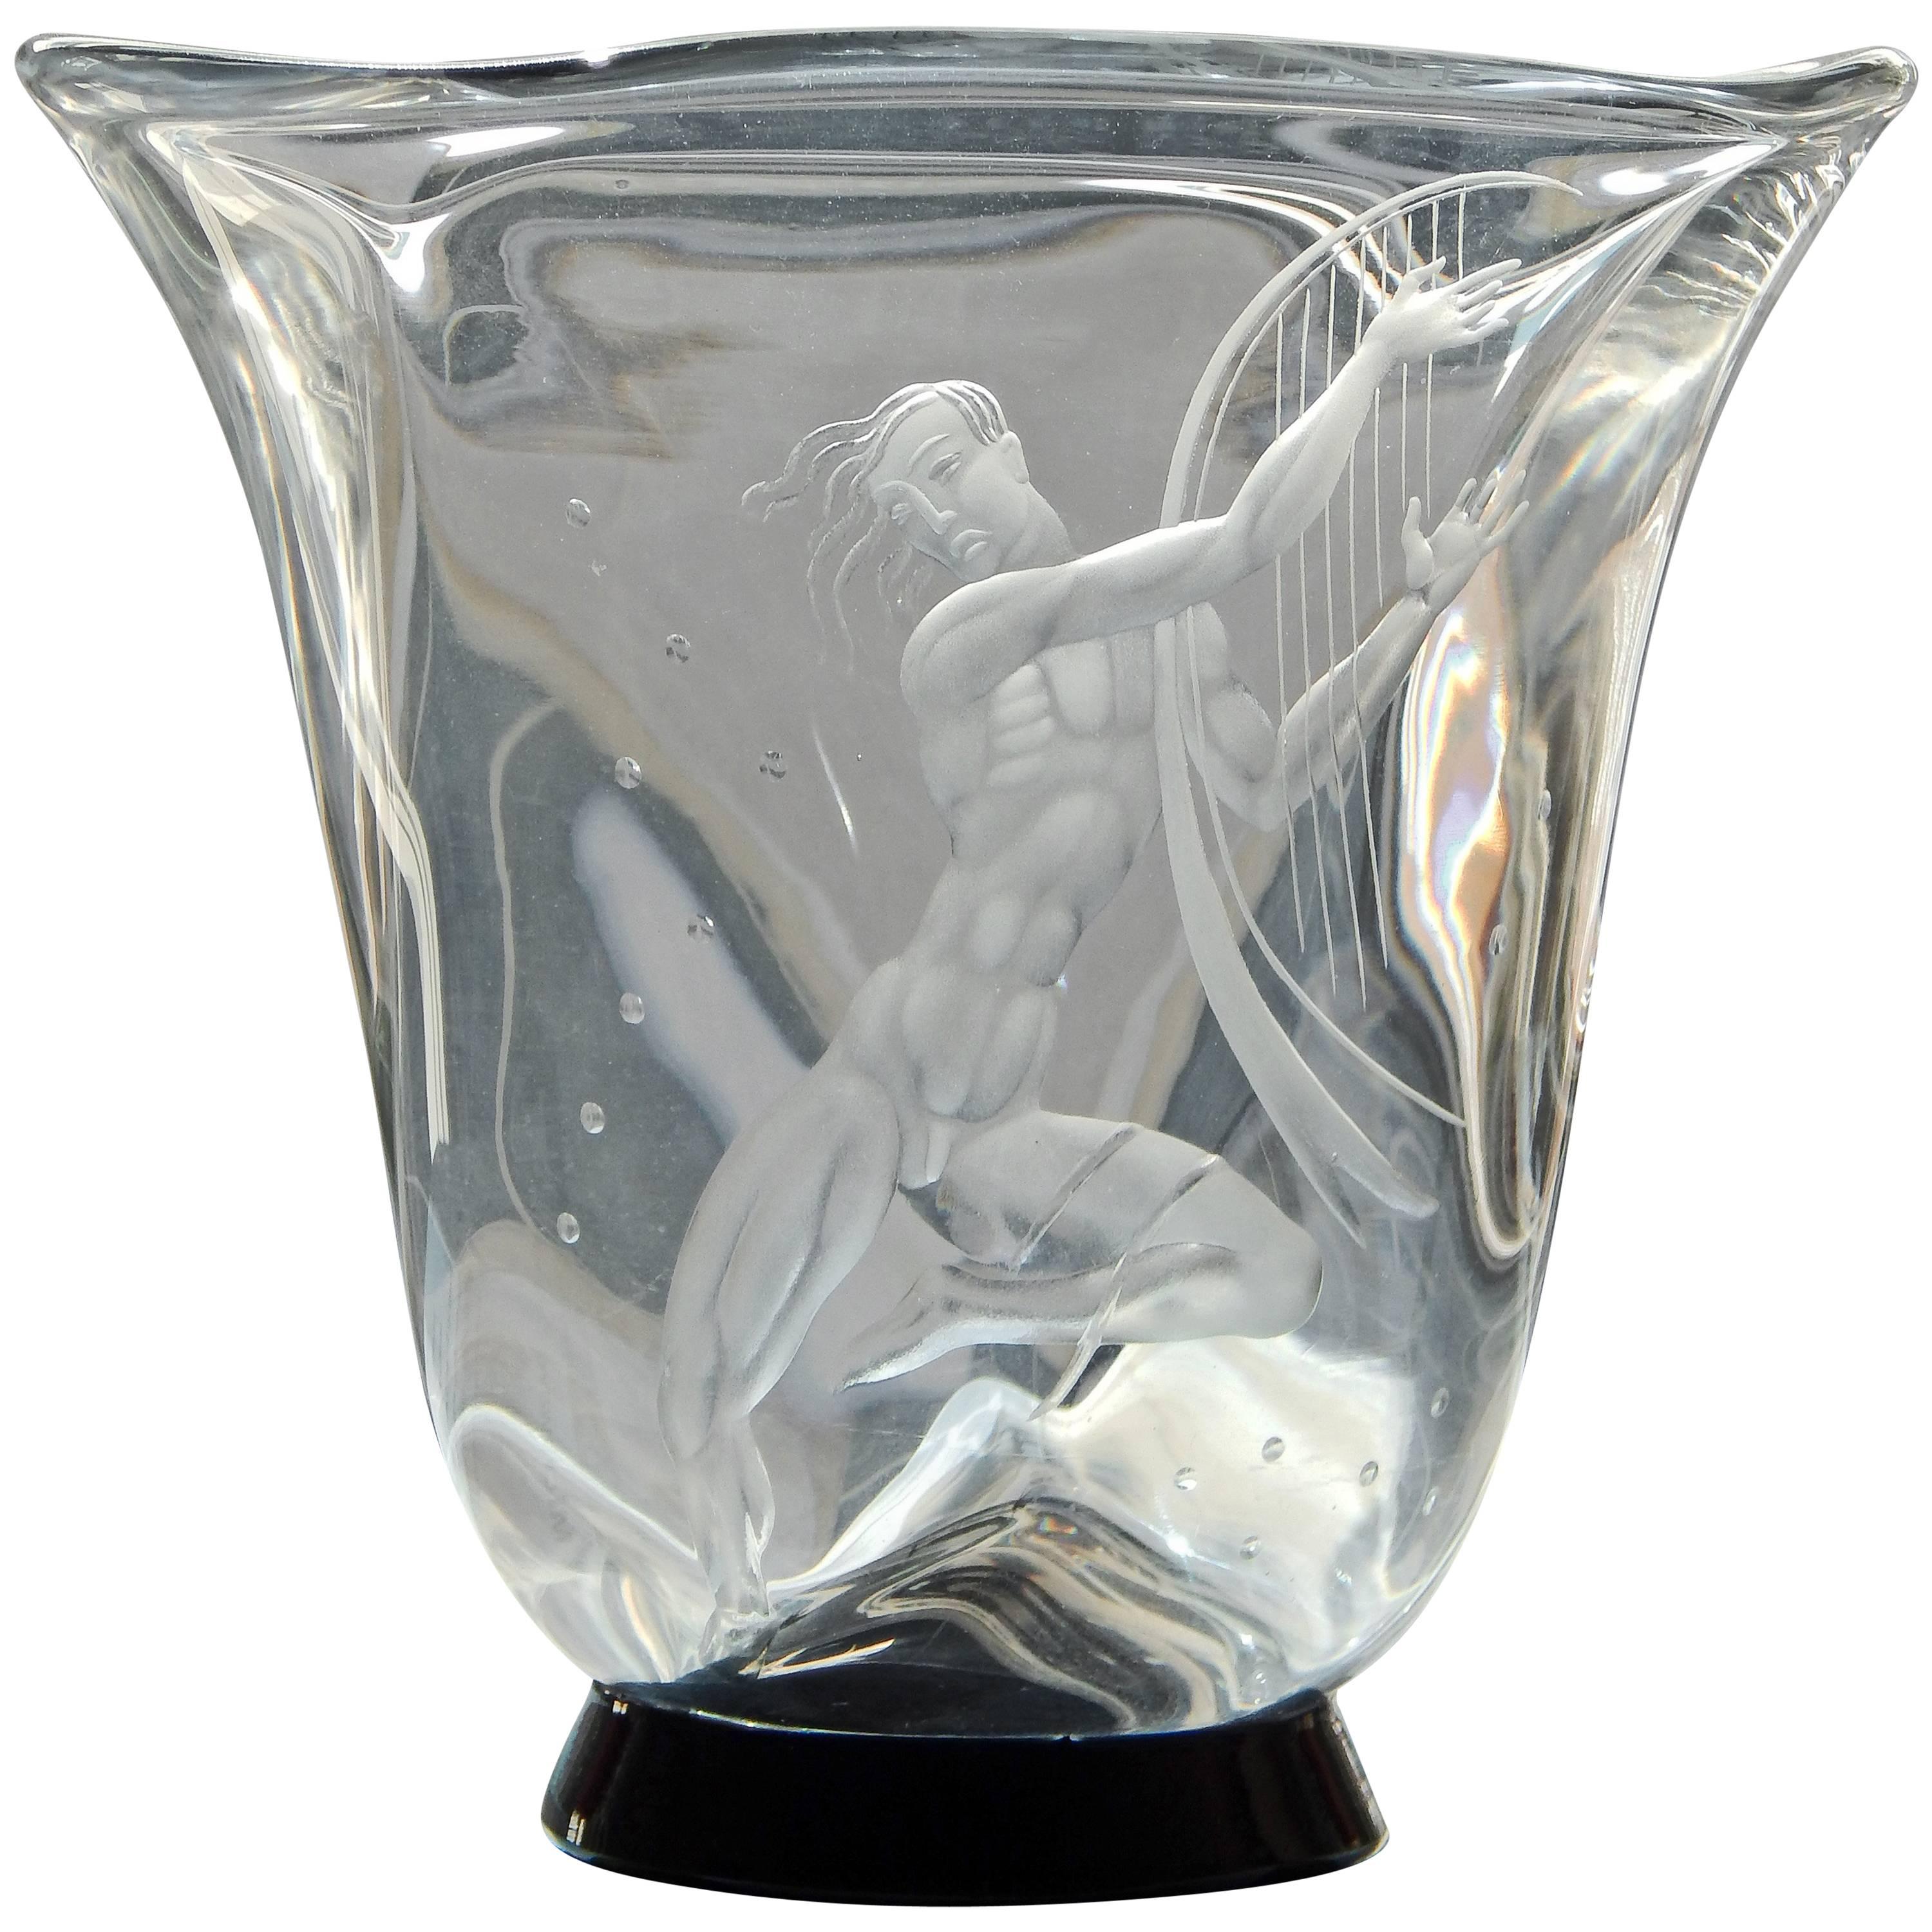 "Nude Male with Harp", Quintessential Art Deco Engraved Glass Vase by Lindstrand For Sale